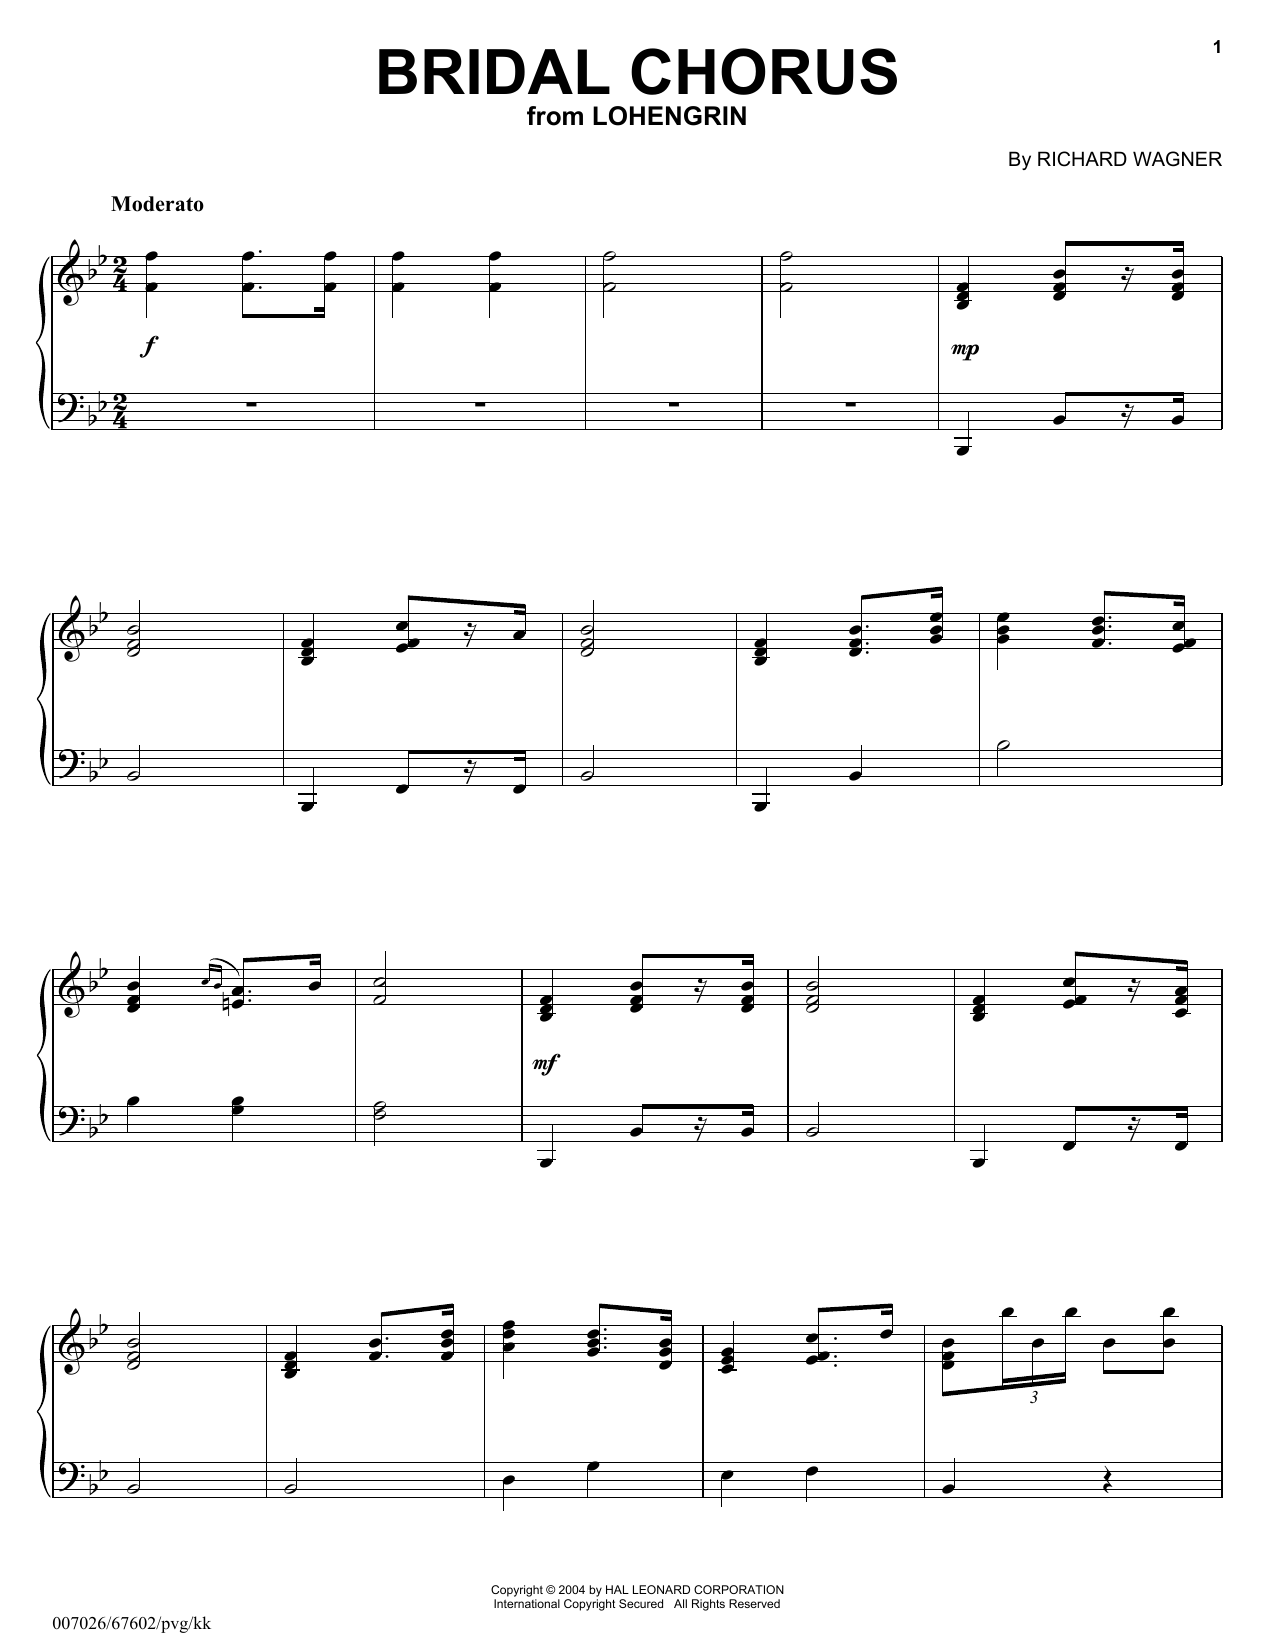 Download Richard Wagner Bridal Chorus sheet music notes and chords for Easy Piano - Download Printable PDF and start playing in minutes.